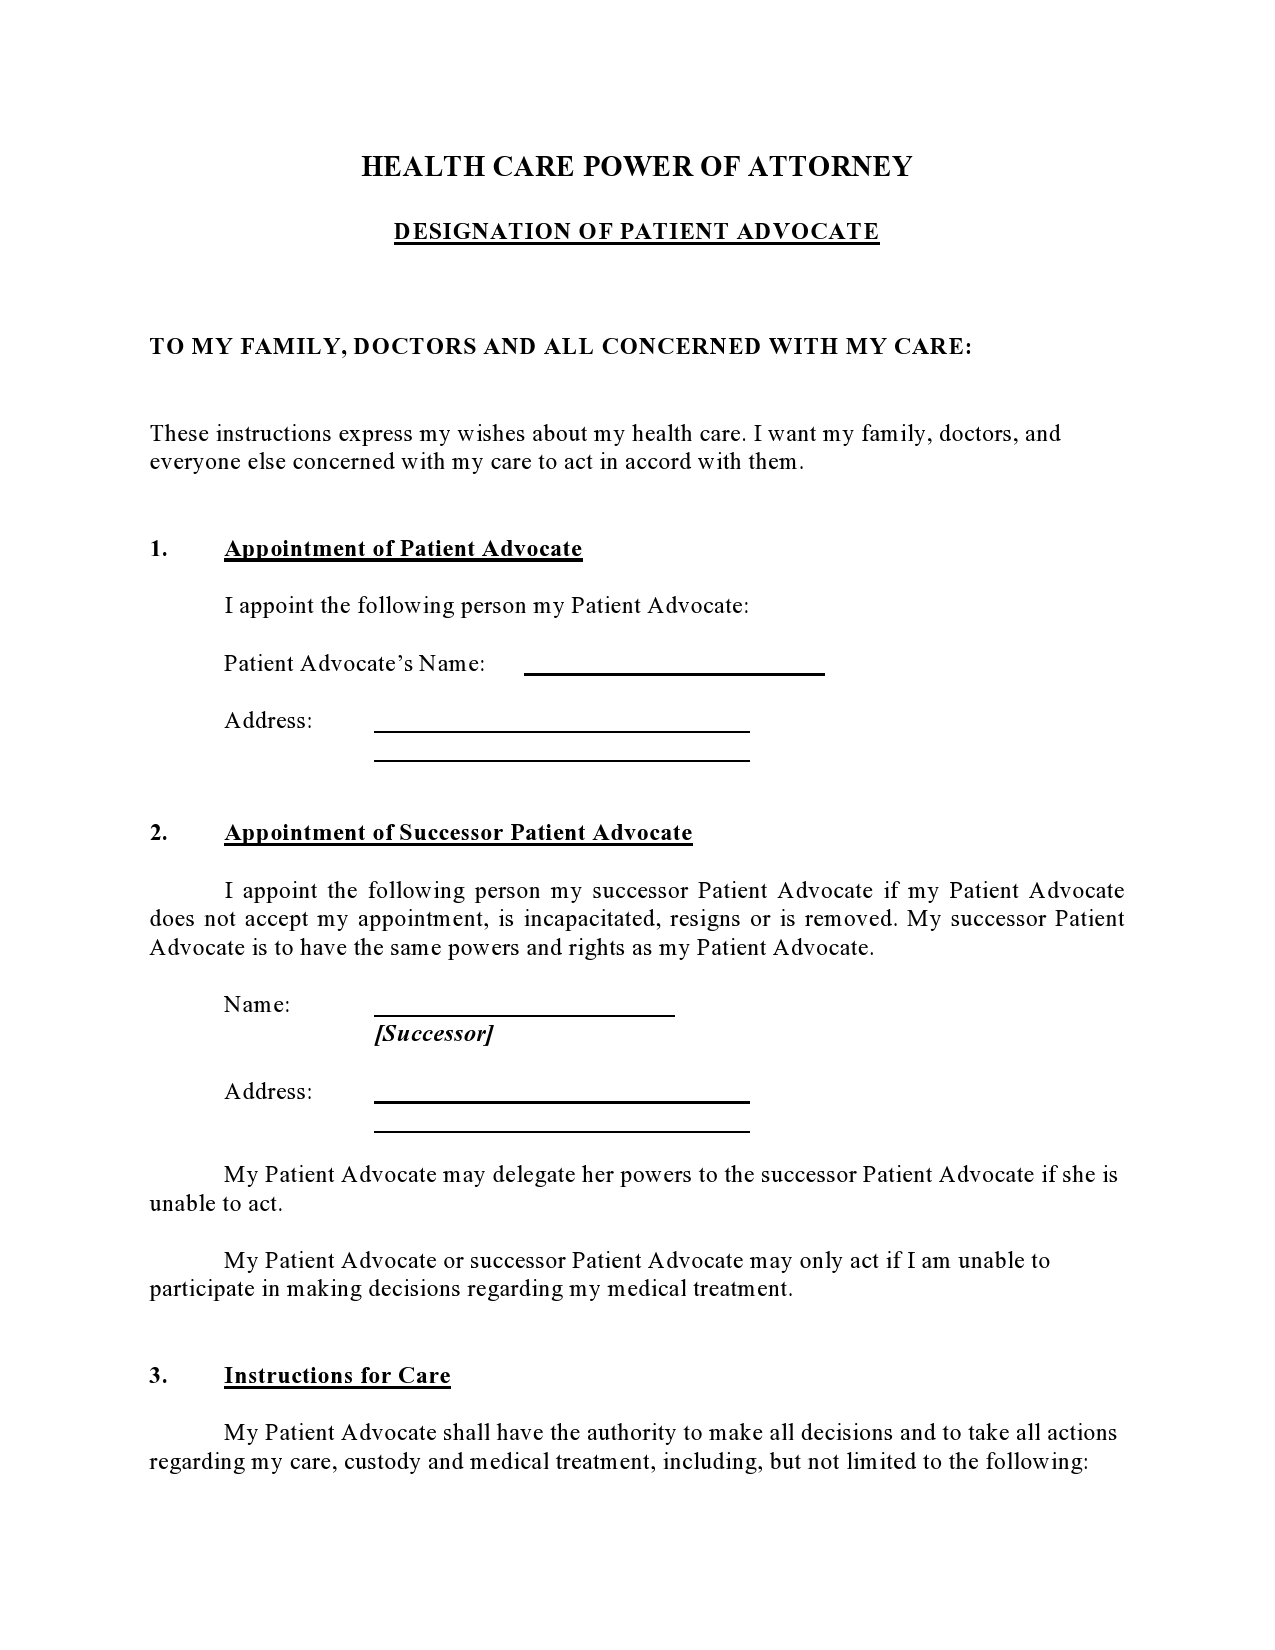 Free medical power of attorney 15